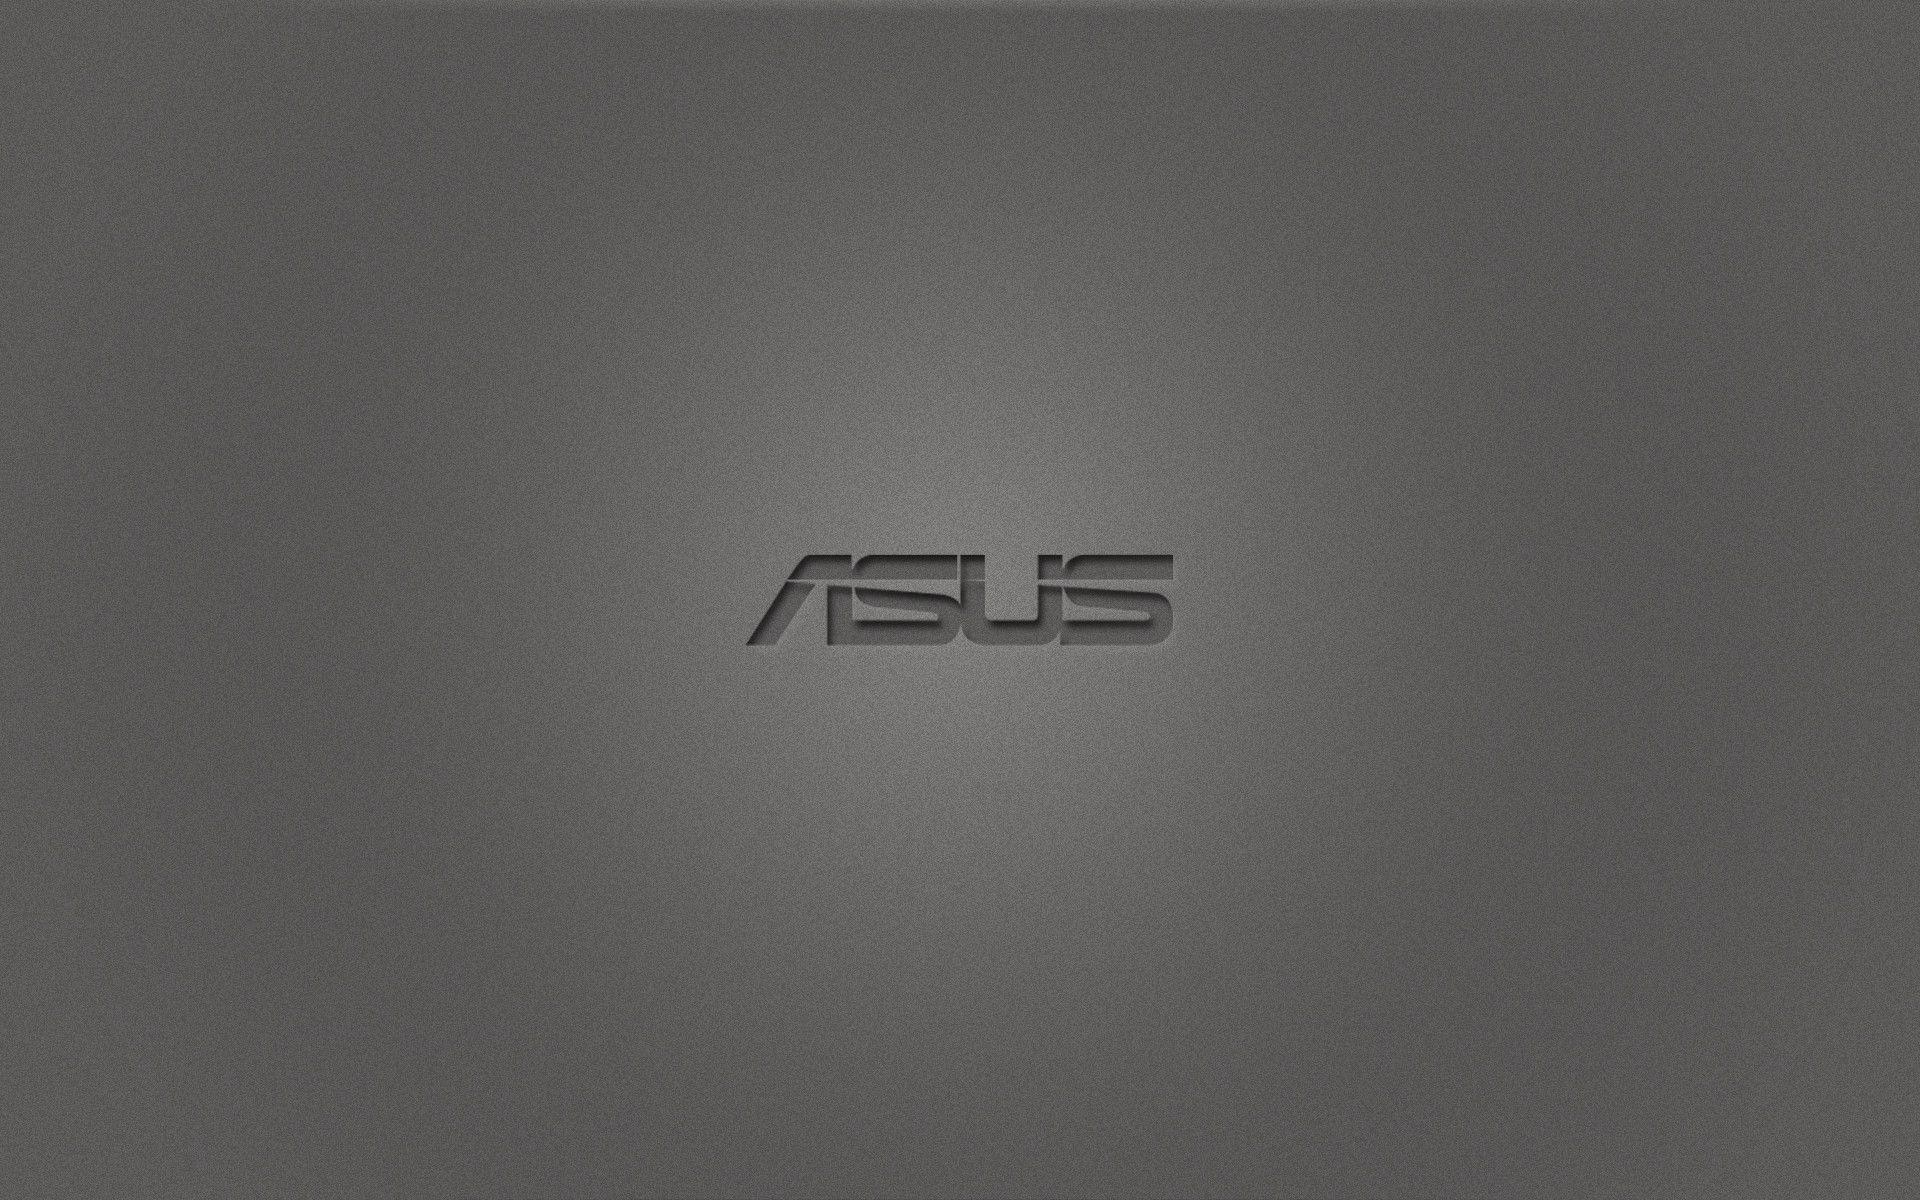 Asus Wallpaper Cool HD Wallpaper Picture on ScreenCrot.Com